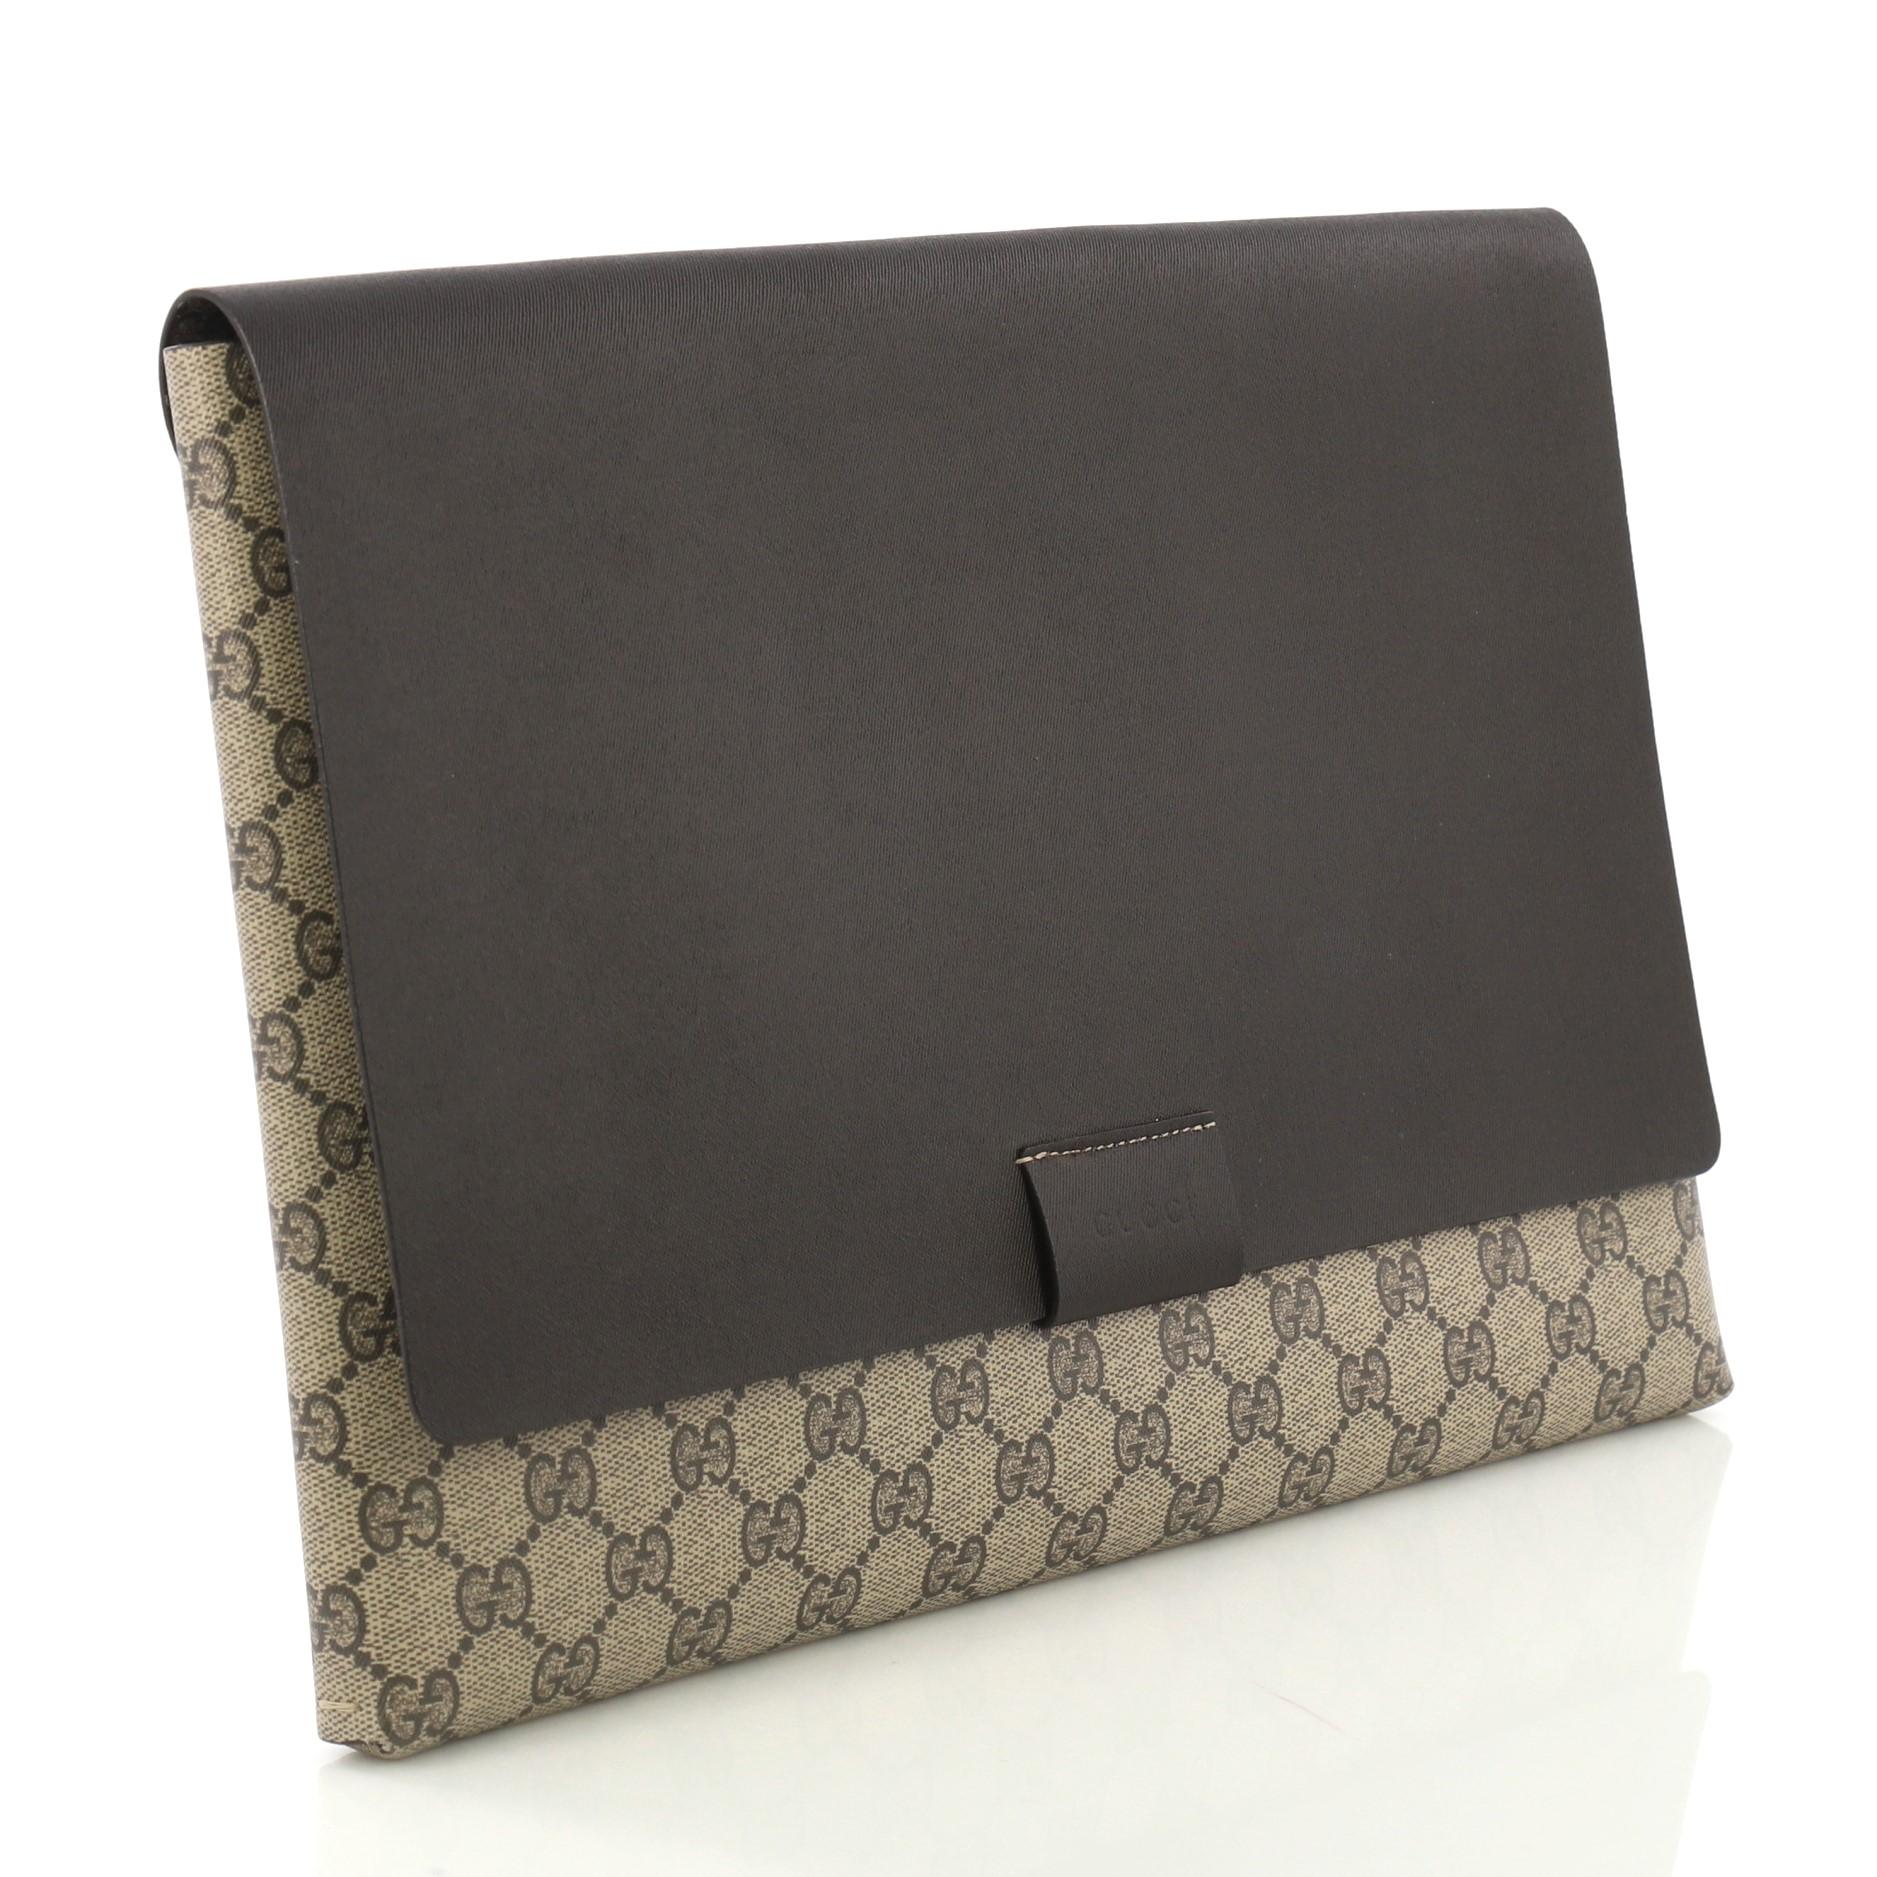 This Gucci Envelope Clutch GG Canvas and Leather Large, crafted from brown GG supreme coated canvas and leather, features stamped logo at the front flap. Its flap opens to a brown leather interior. 

Estimated Retail Price: $900
Condition: